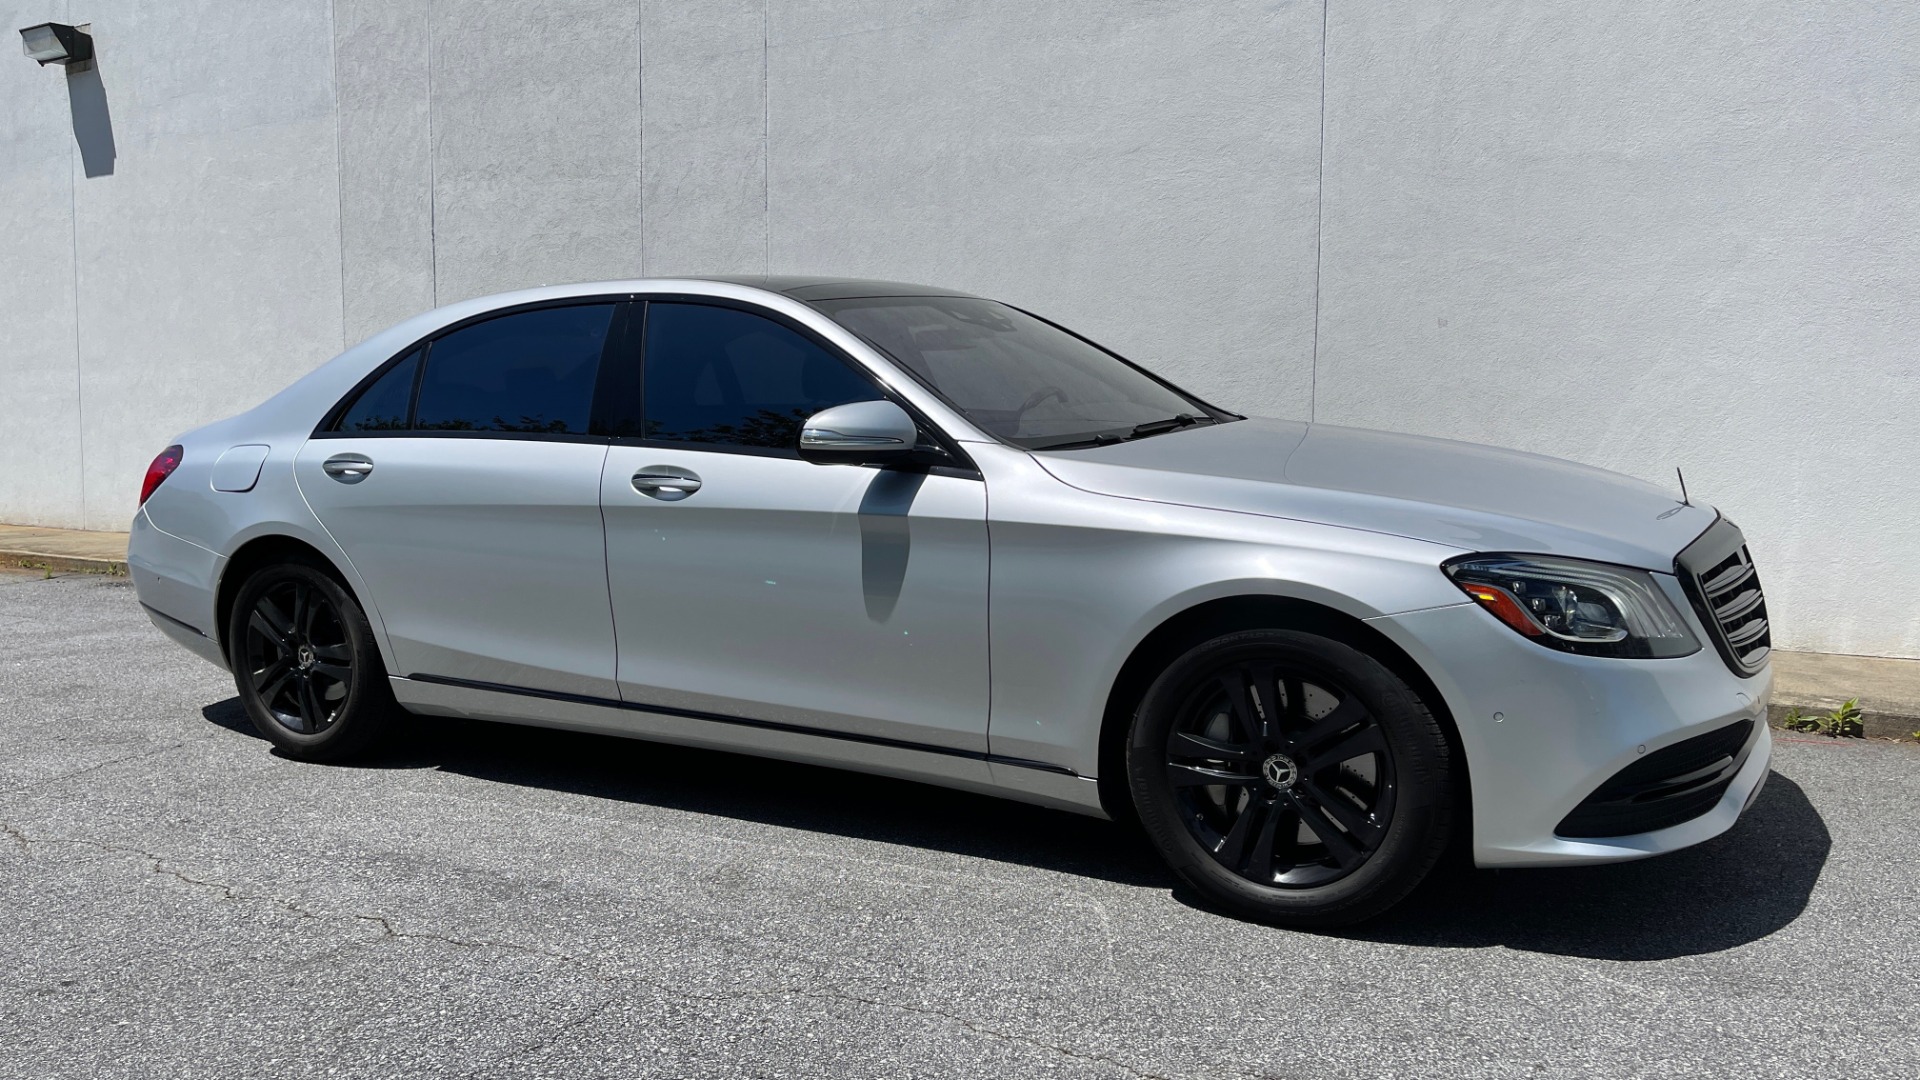 Used 2018 Mercedes-Benz S-CLASS S 450 3.0L SEDAN 362HP / PREMIUM / SUNROOF / SURROUND VIEW for sale $54,995 at Formula Imports in Charlotte NC 28227 7